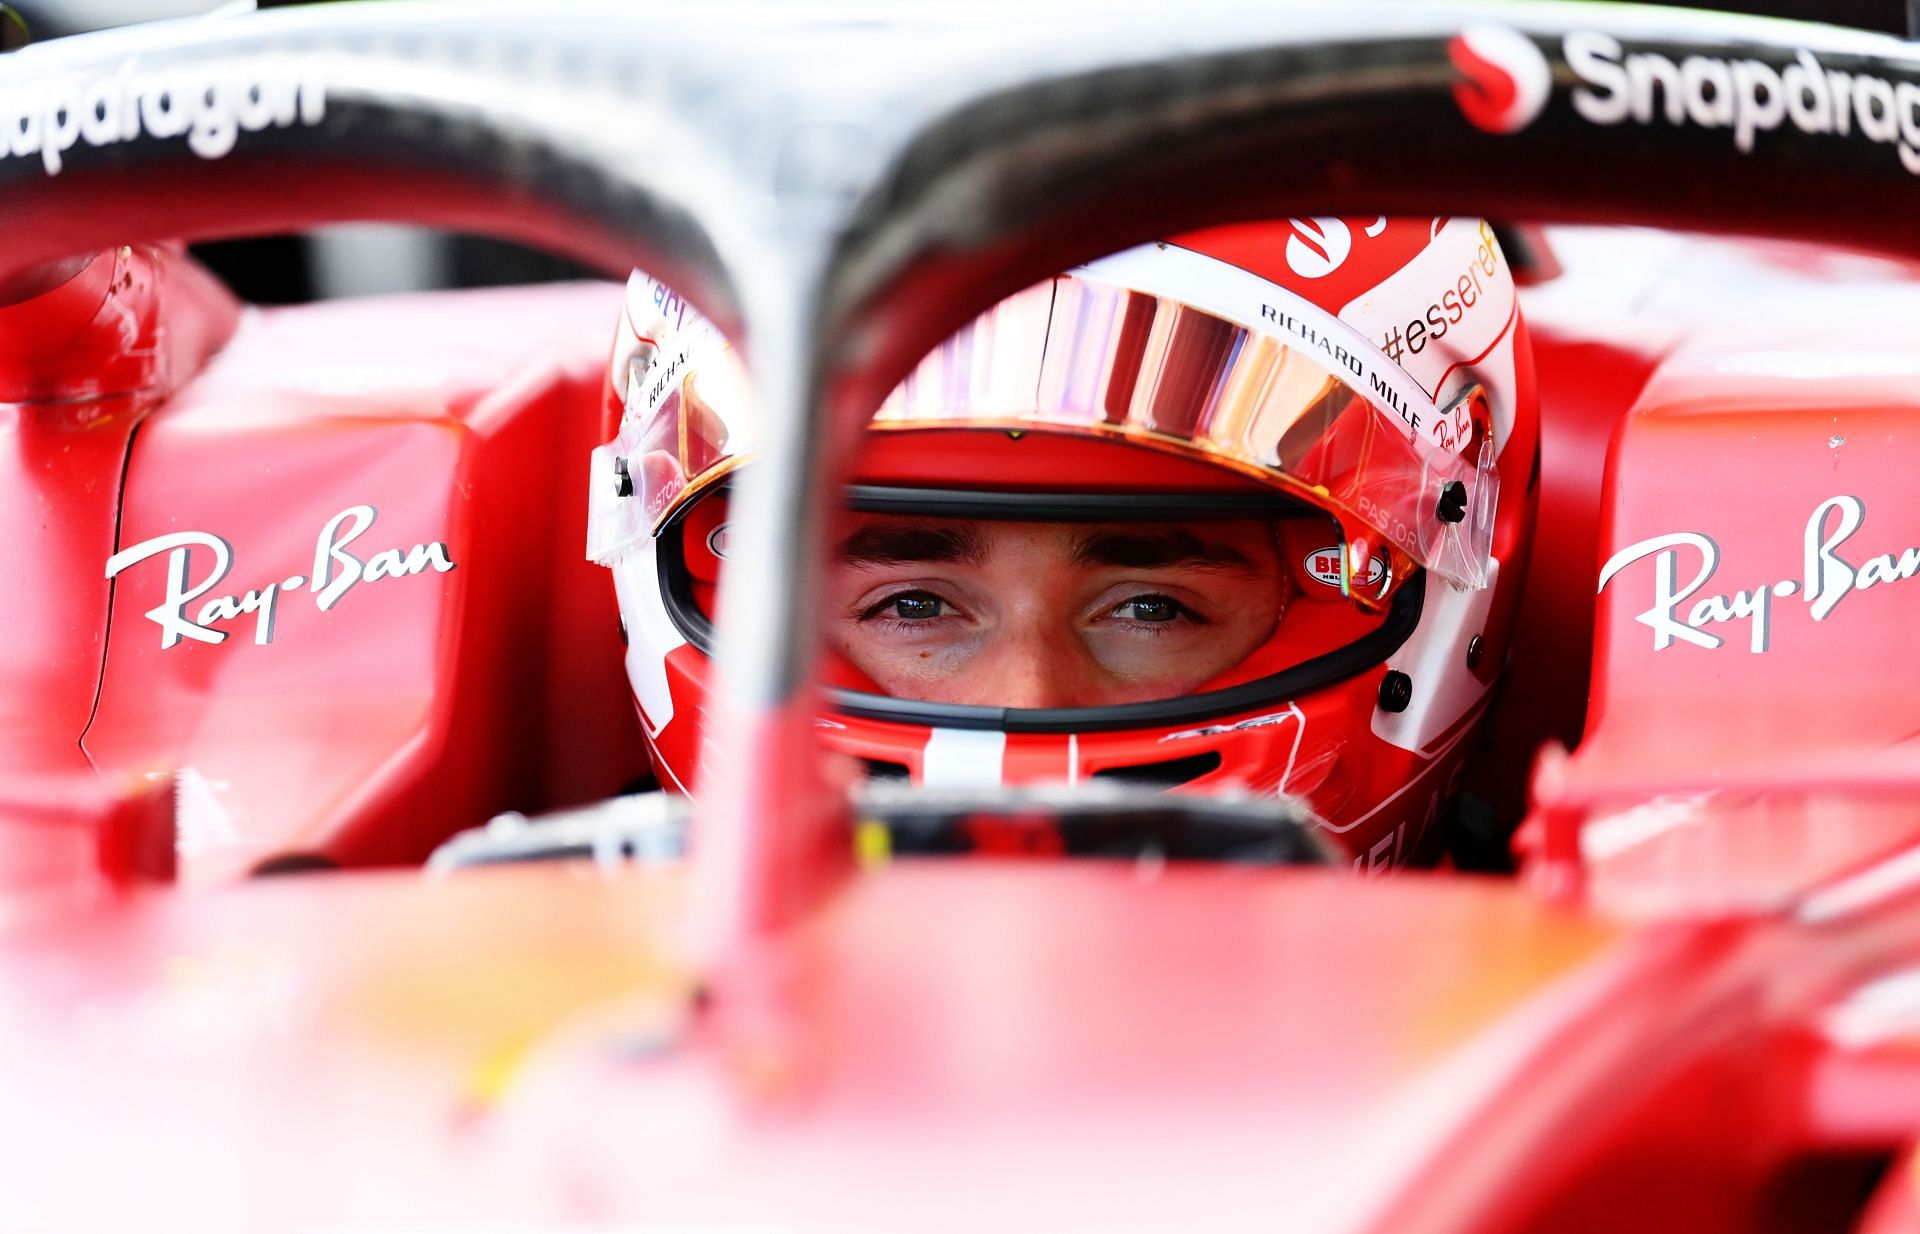 Charles Leclerc will be hoping for a stable weekend without any issues